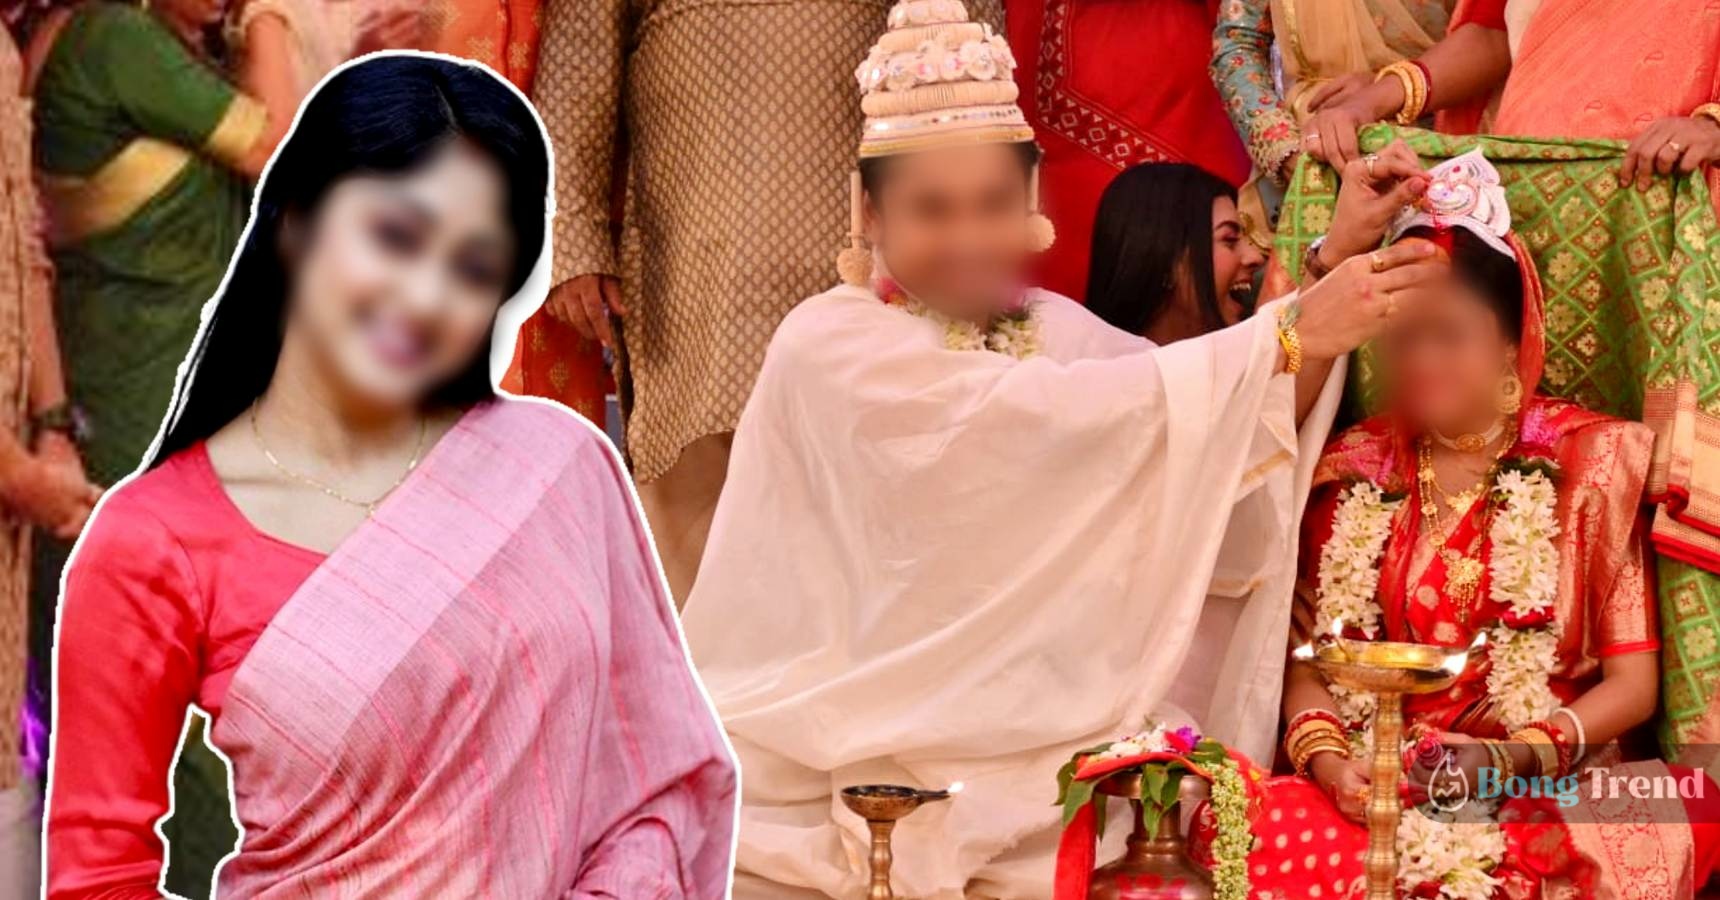 Television Actress Rupsa Chatterjee getting married